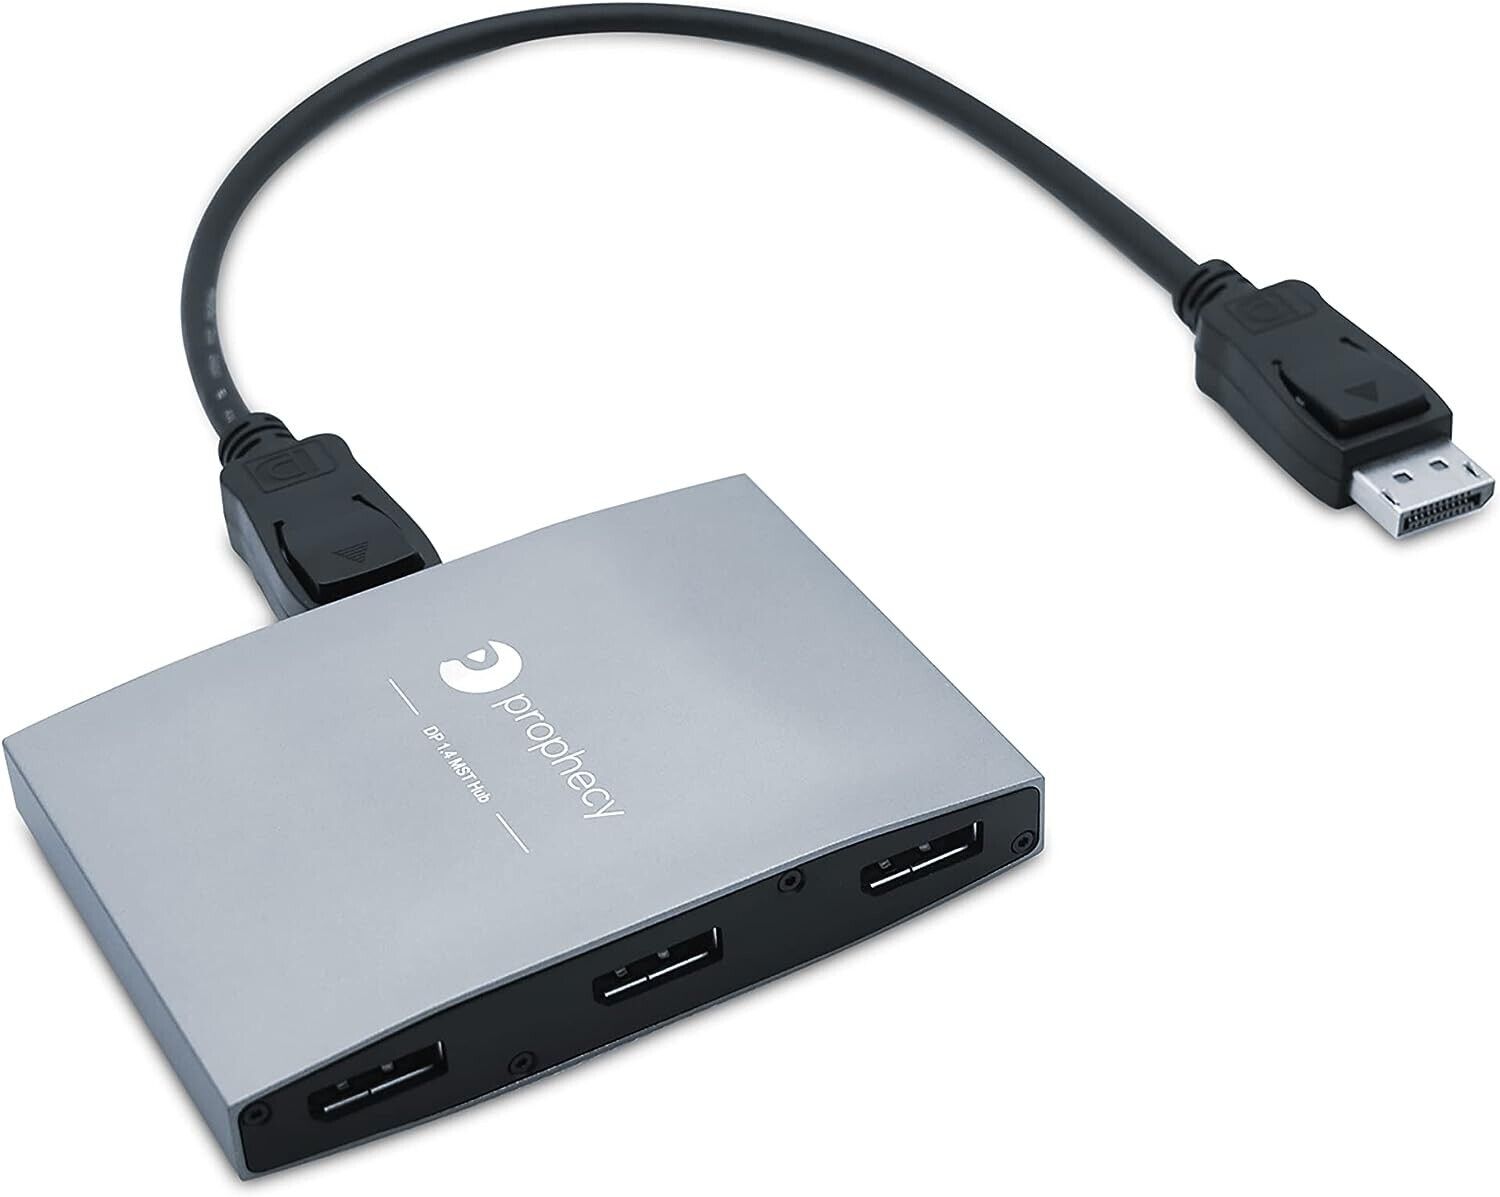 gofanco Prophecy 1x3 DisplayPort 1.2 to HDMI Multi Monitor Adapter for Extended